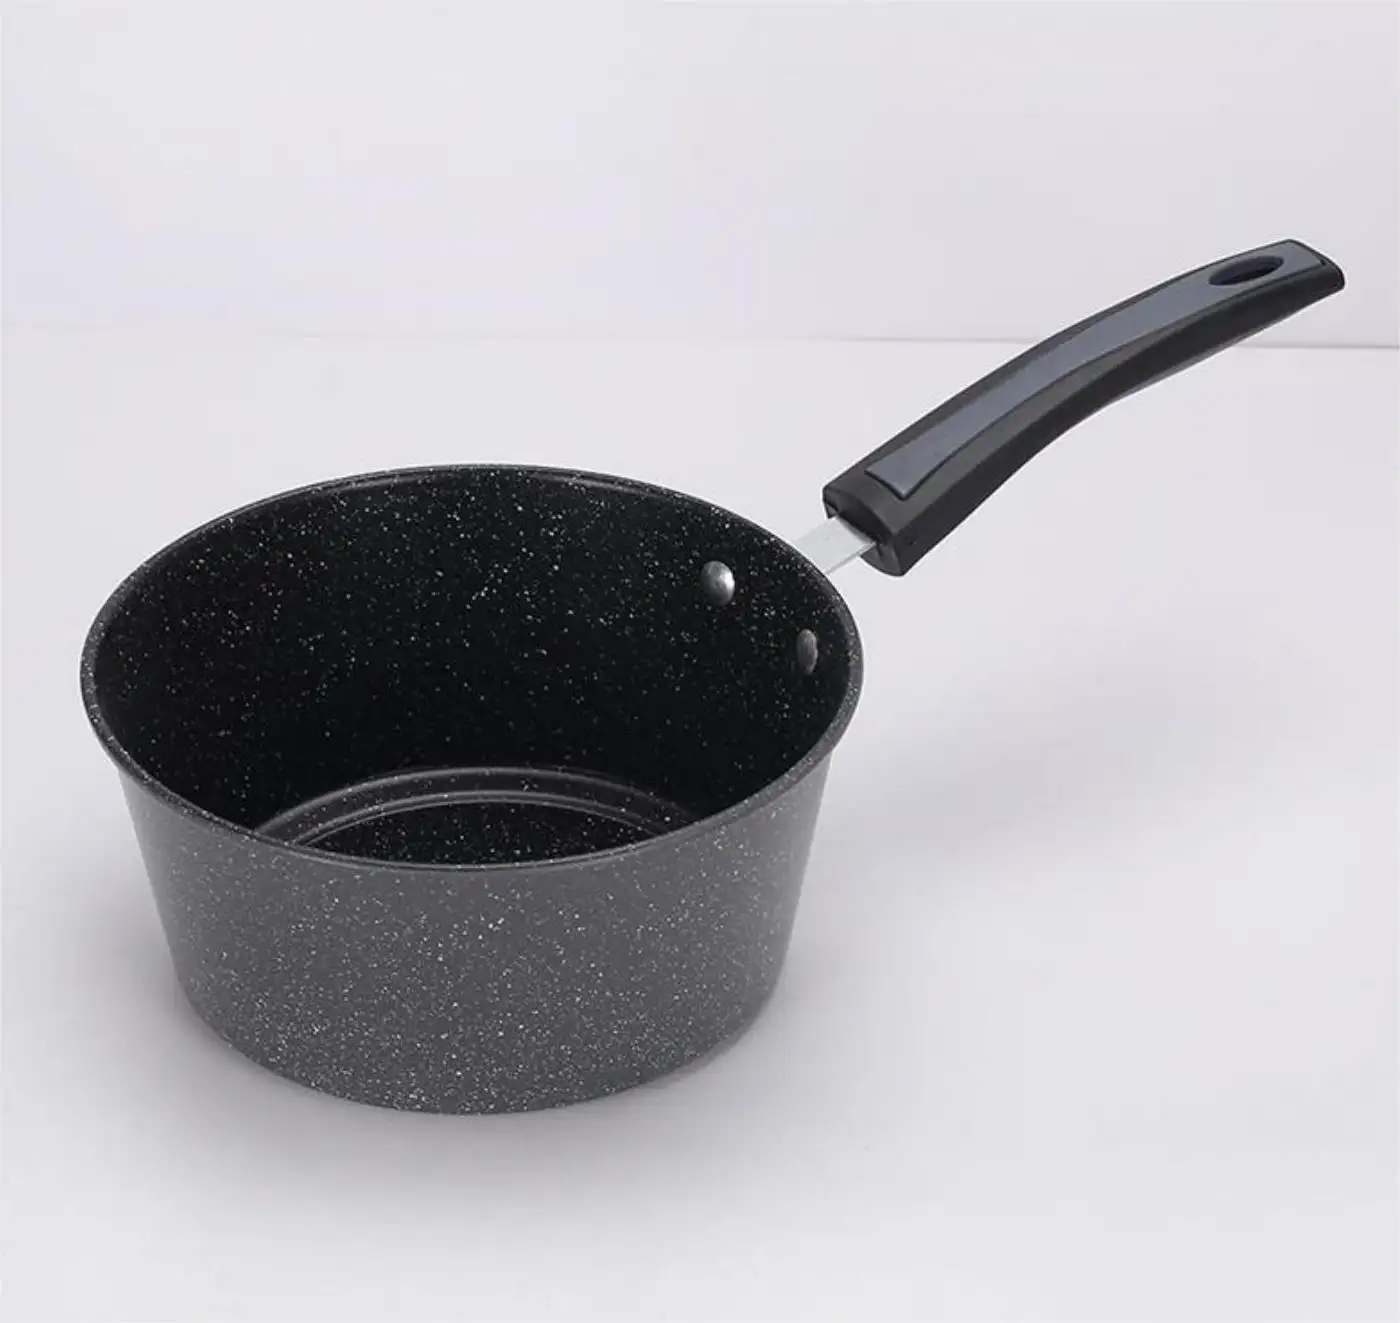 24cm Hot sale marble coating non-stick Cooking soup pot with handle kitchen cookware No reviews yet